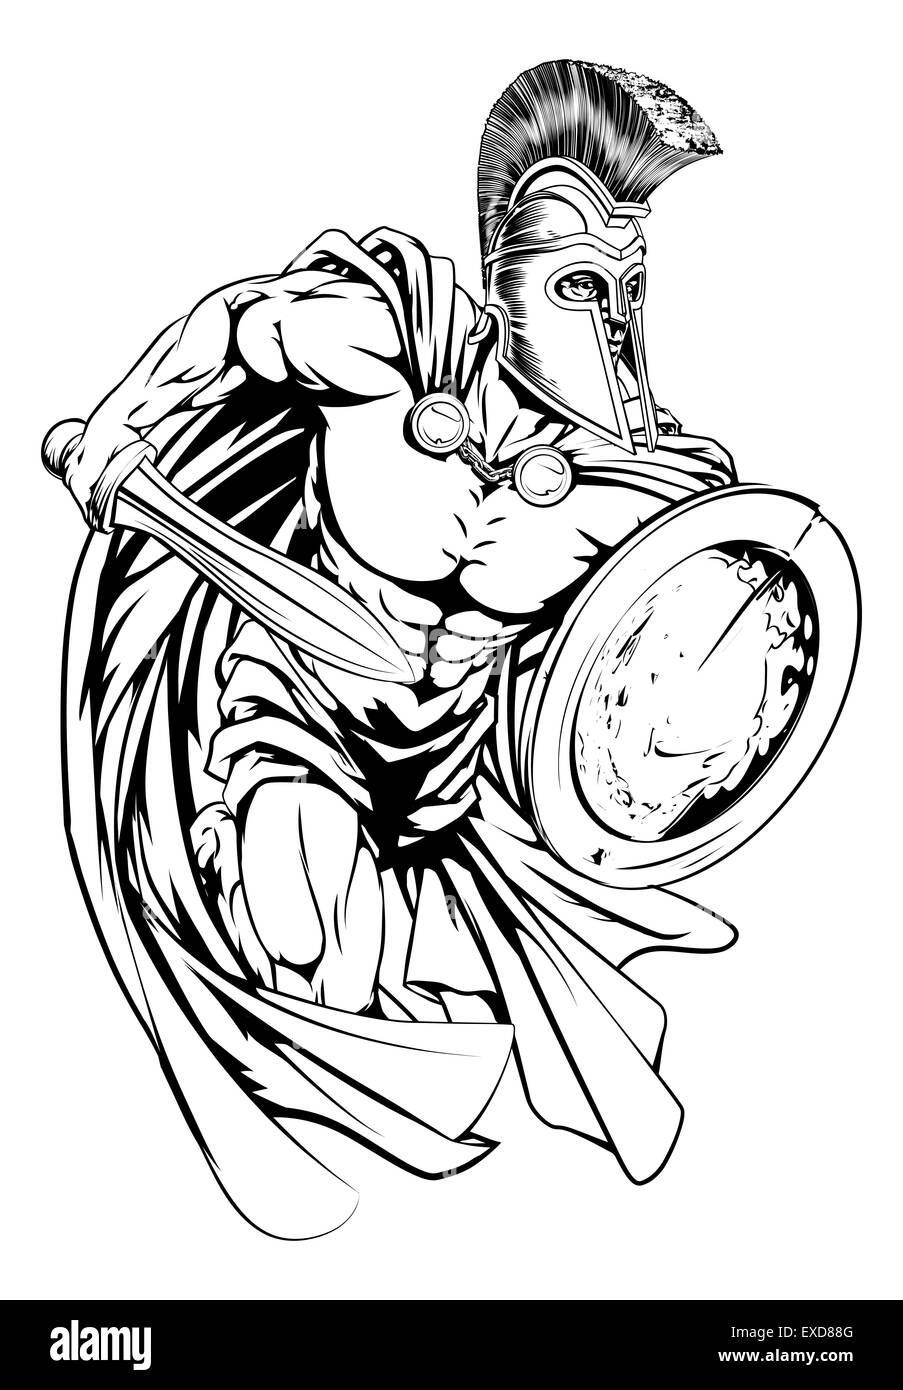 An illustration of a warrior character or sports mascot  in a trojan or Spartan style helmet holding a sword and shield Stock Photo